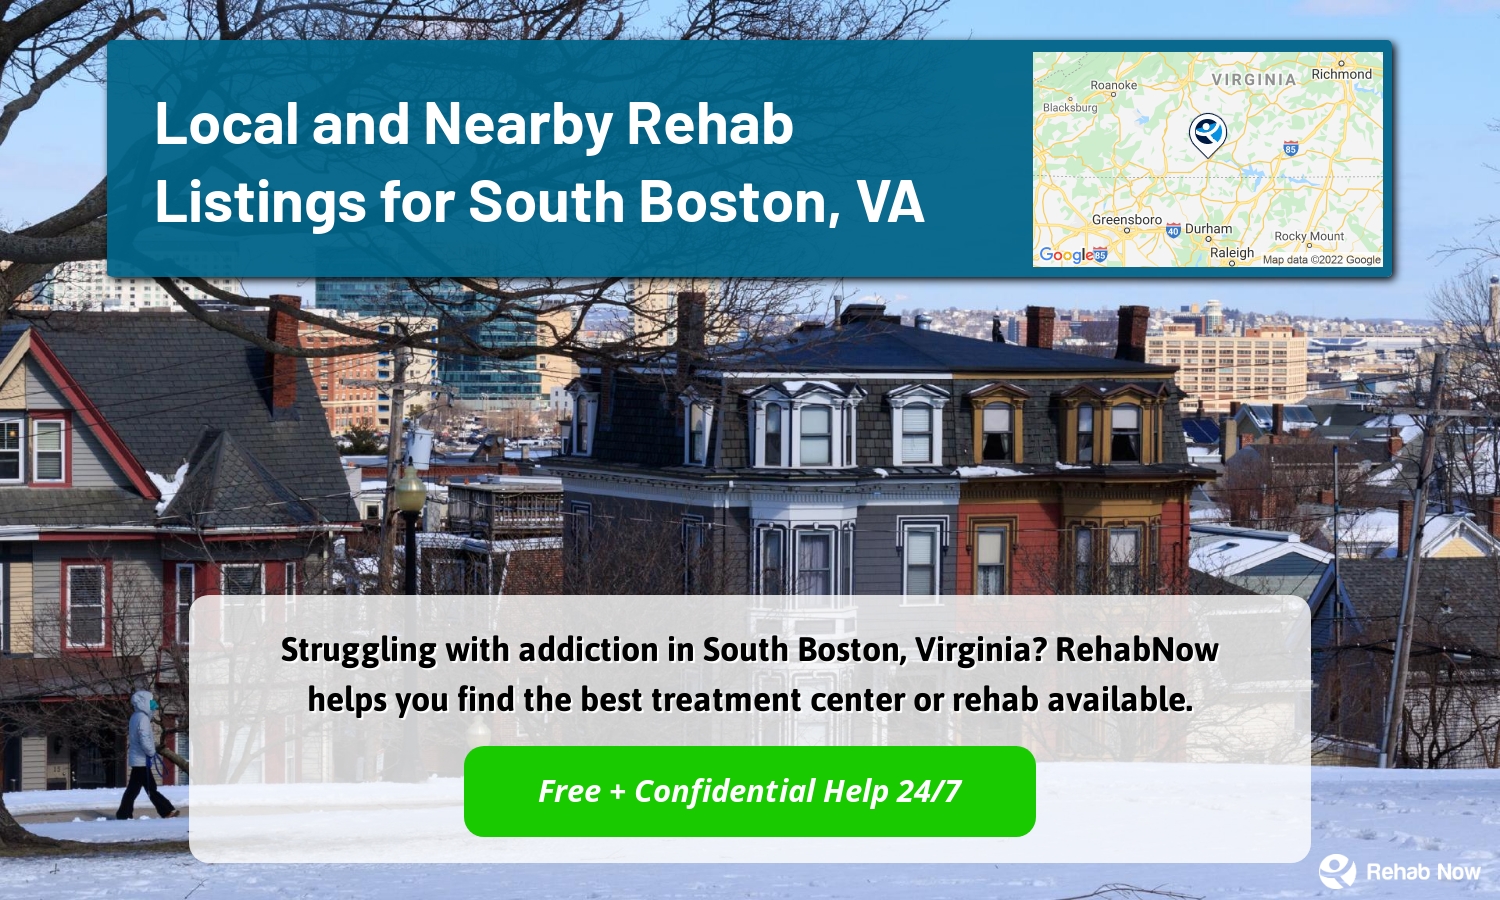 Struggling with addiction in South Boston, Virginia? RehabNow helps you find the best treatment center or rehab available.